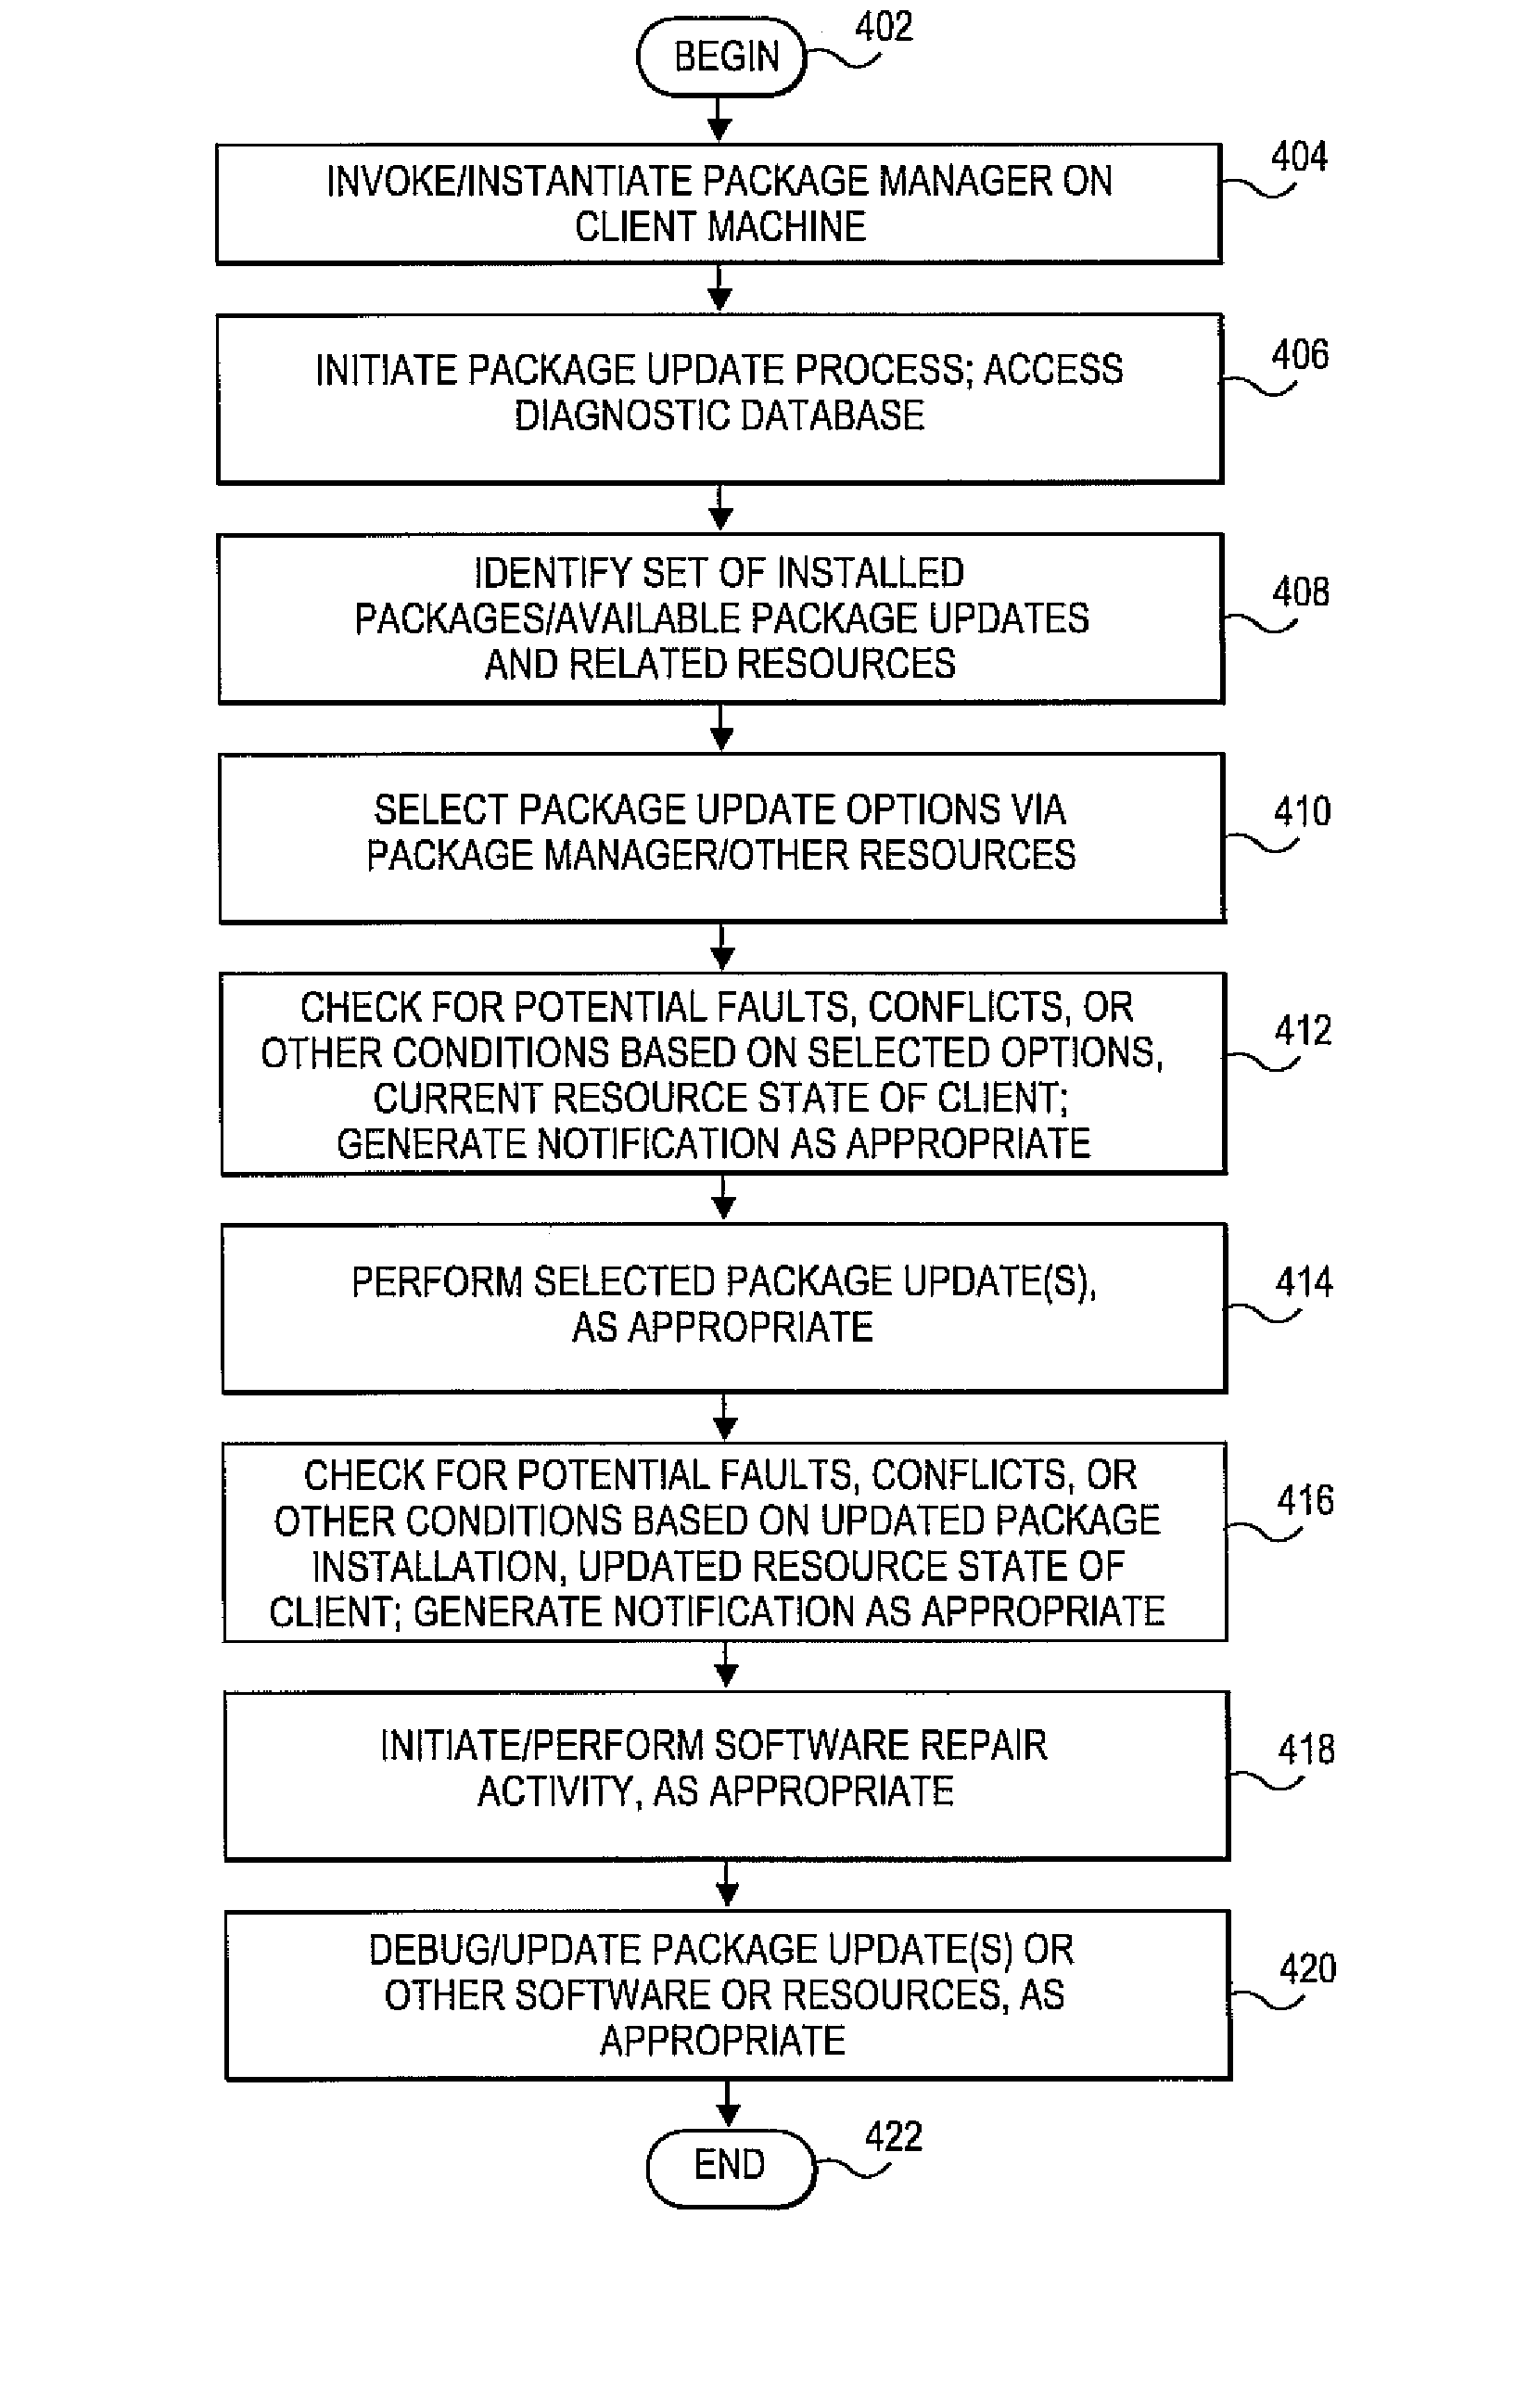 Systems and methods for initiating software repairs in conjunction with software package updates